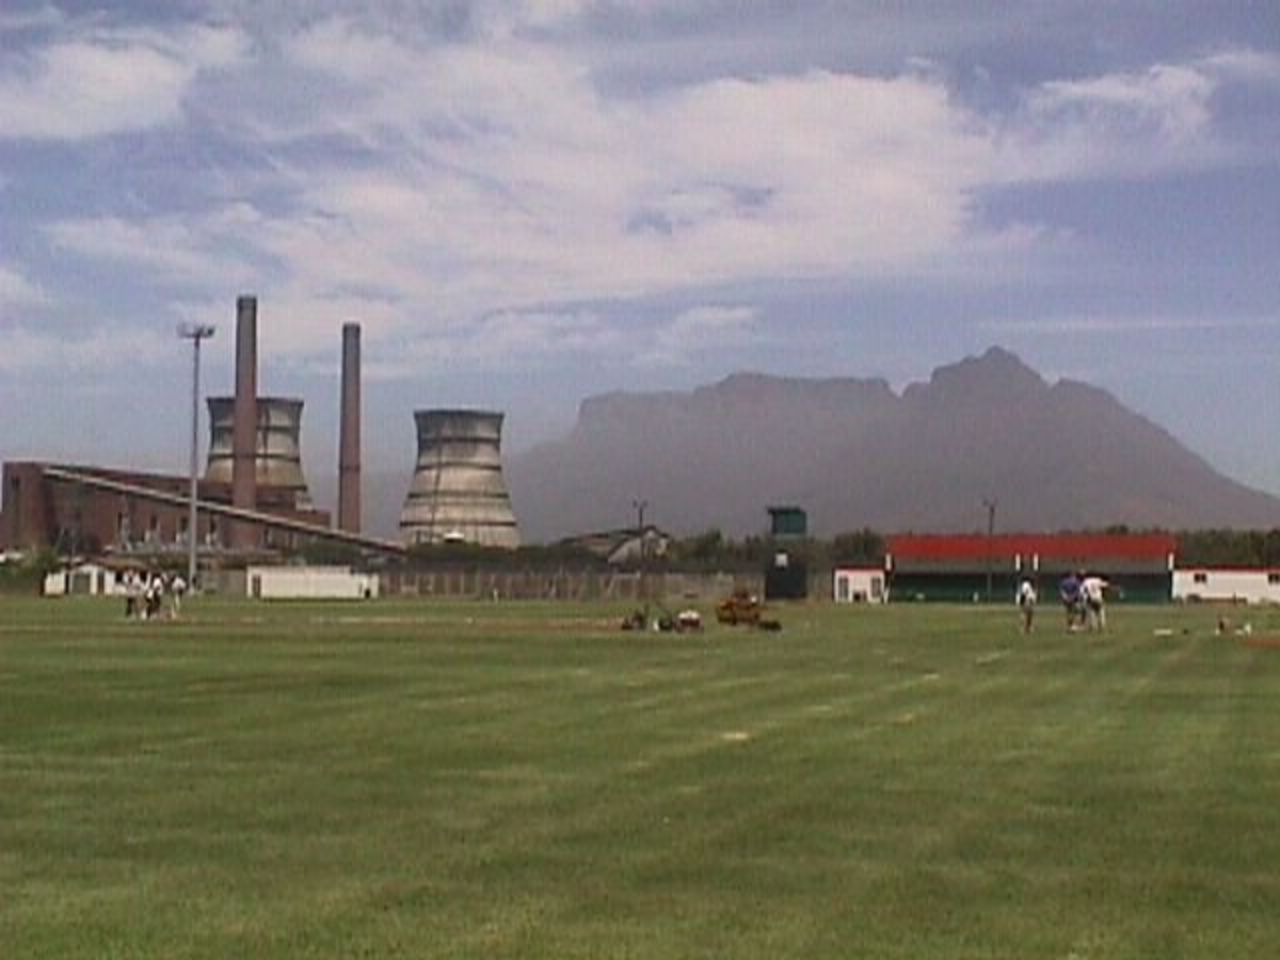 The Langa CC ground , Cape Town , venue of the West Indies v Western Province match being played on Jan 9, '99.